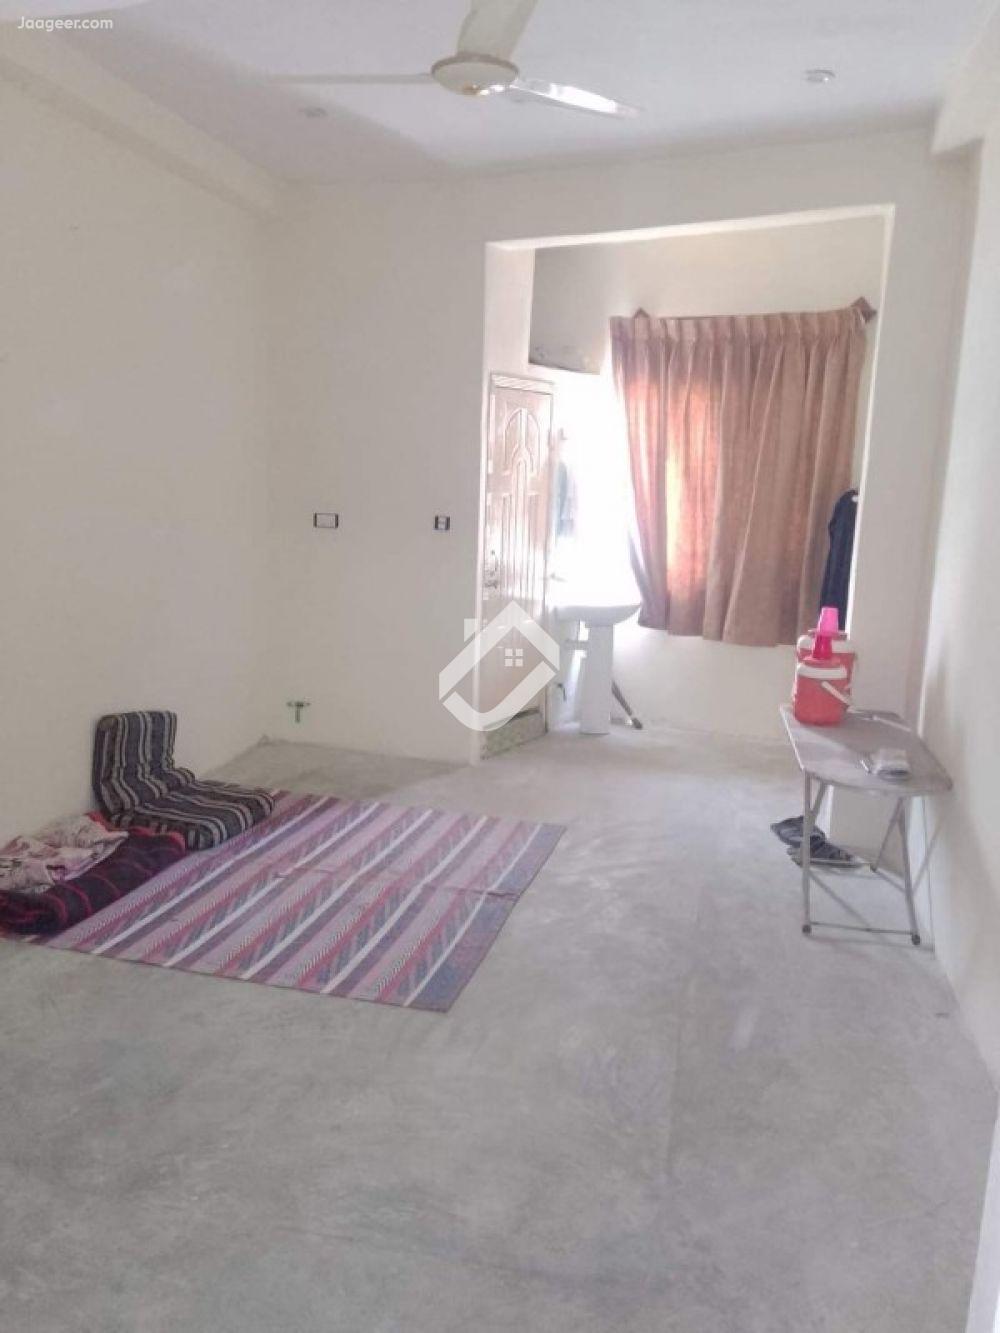 View  2 Marla Triple Storey House For Rent In Faisal Colony in Faisal Colony, Islamabad